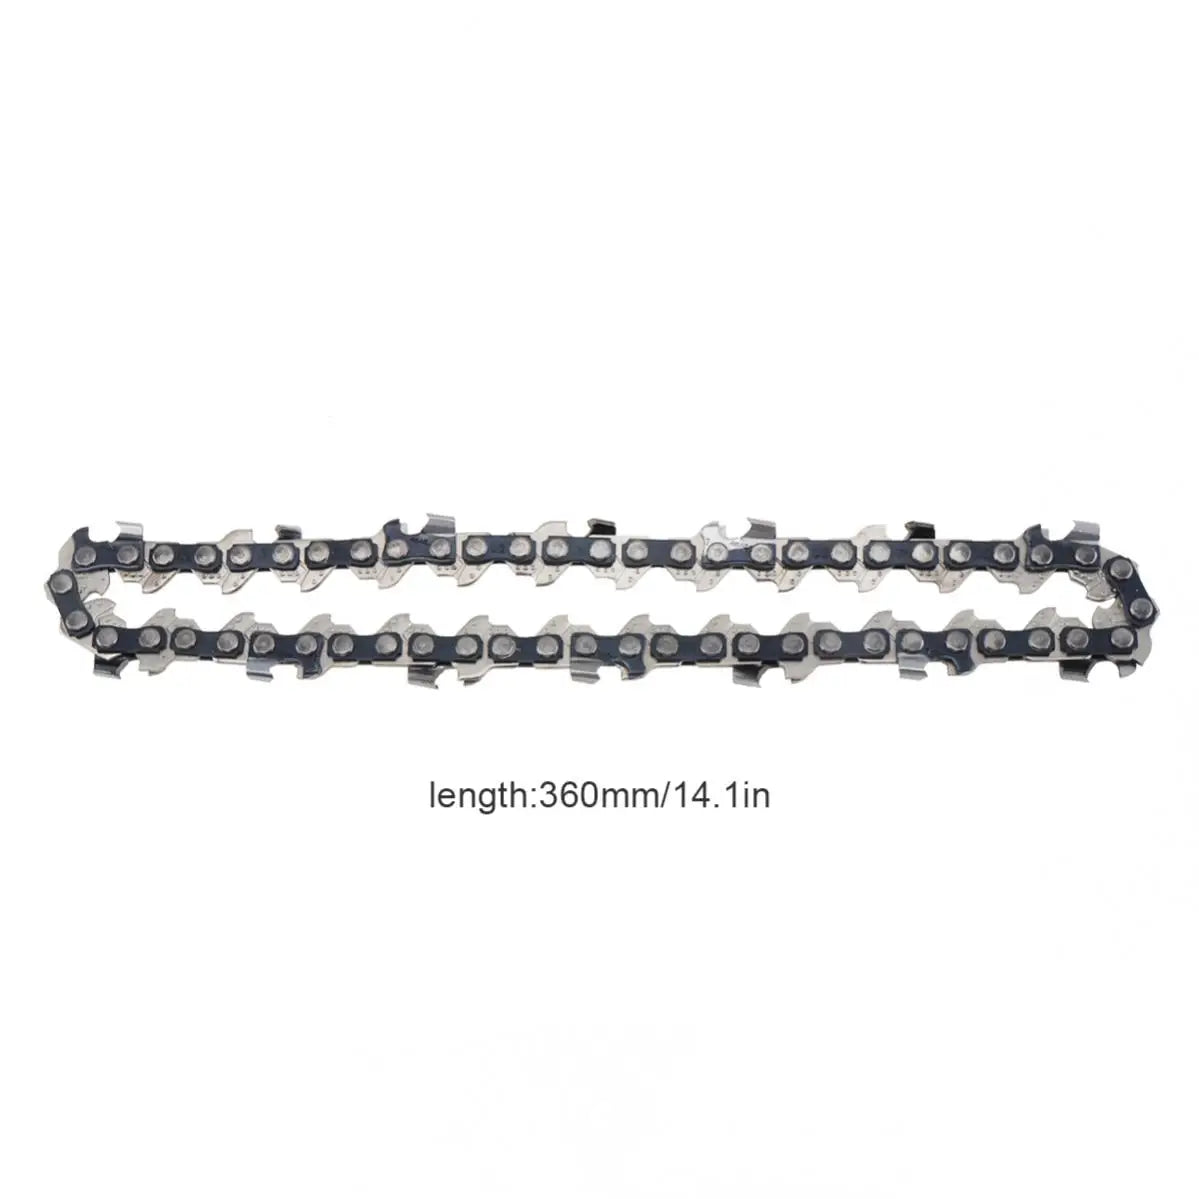 4 Inch Chainsaw Chain Mini Replacement Guide Electric Saw Chain